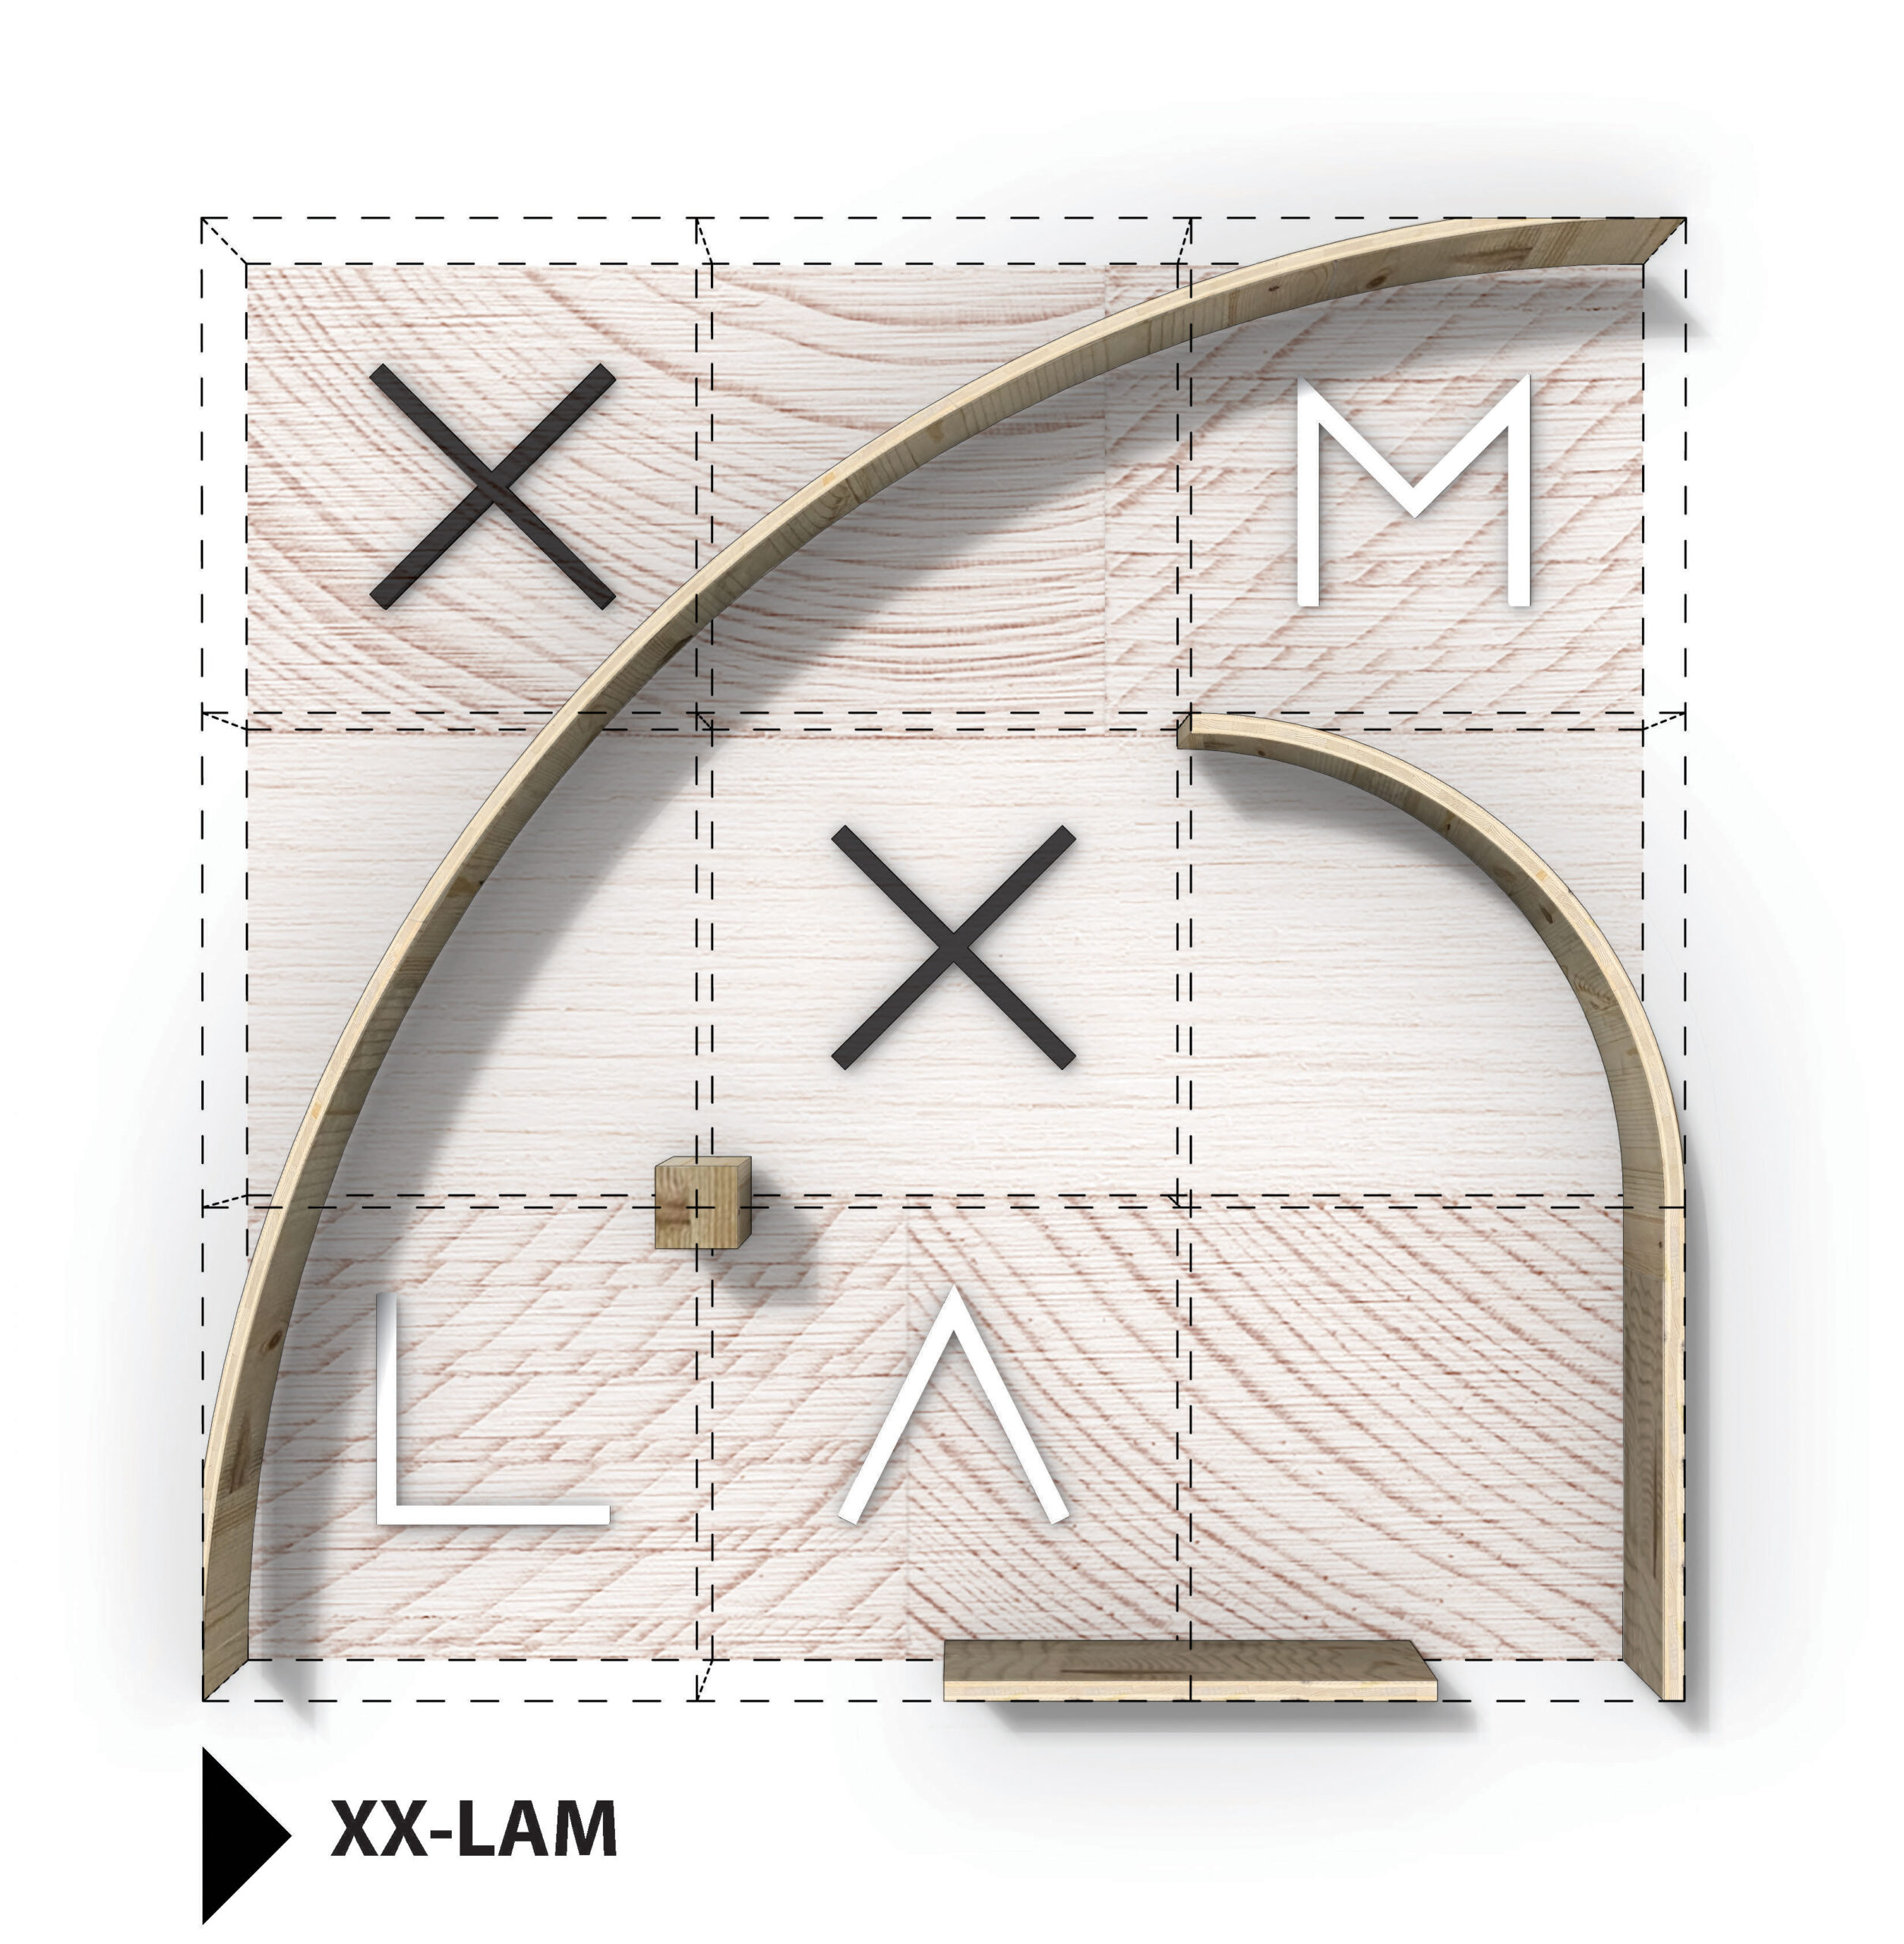 XX-LAM Exhibition opens at Omaha by Design – 12.16.2021